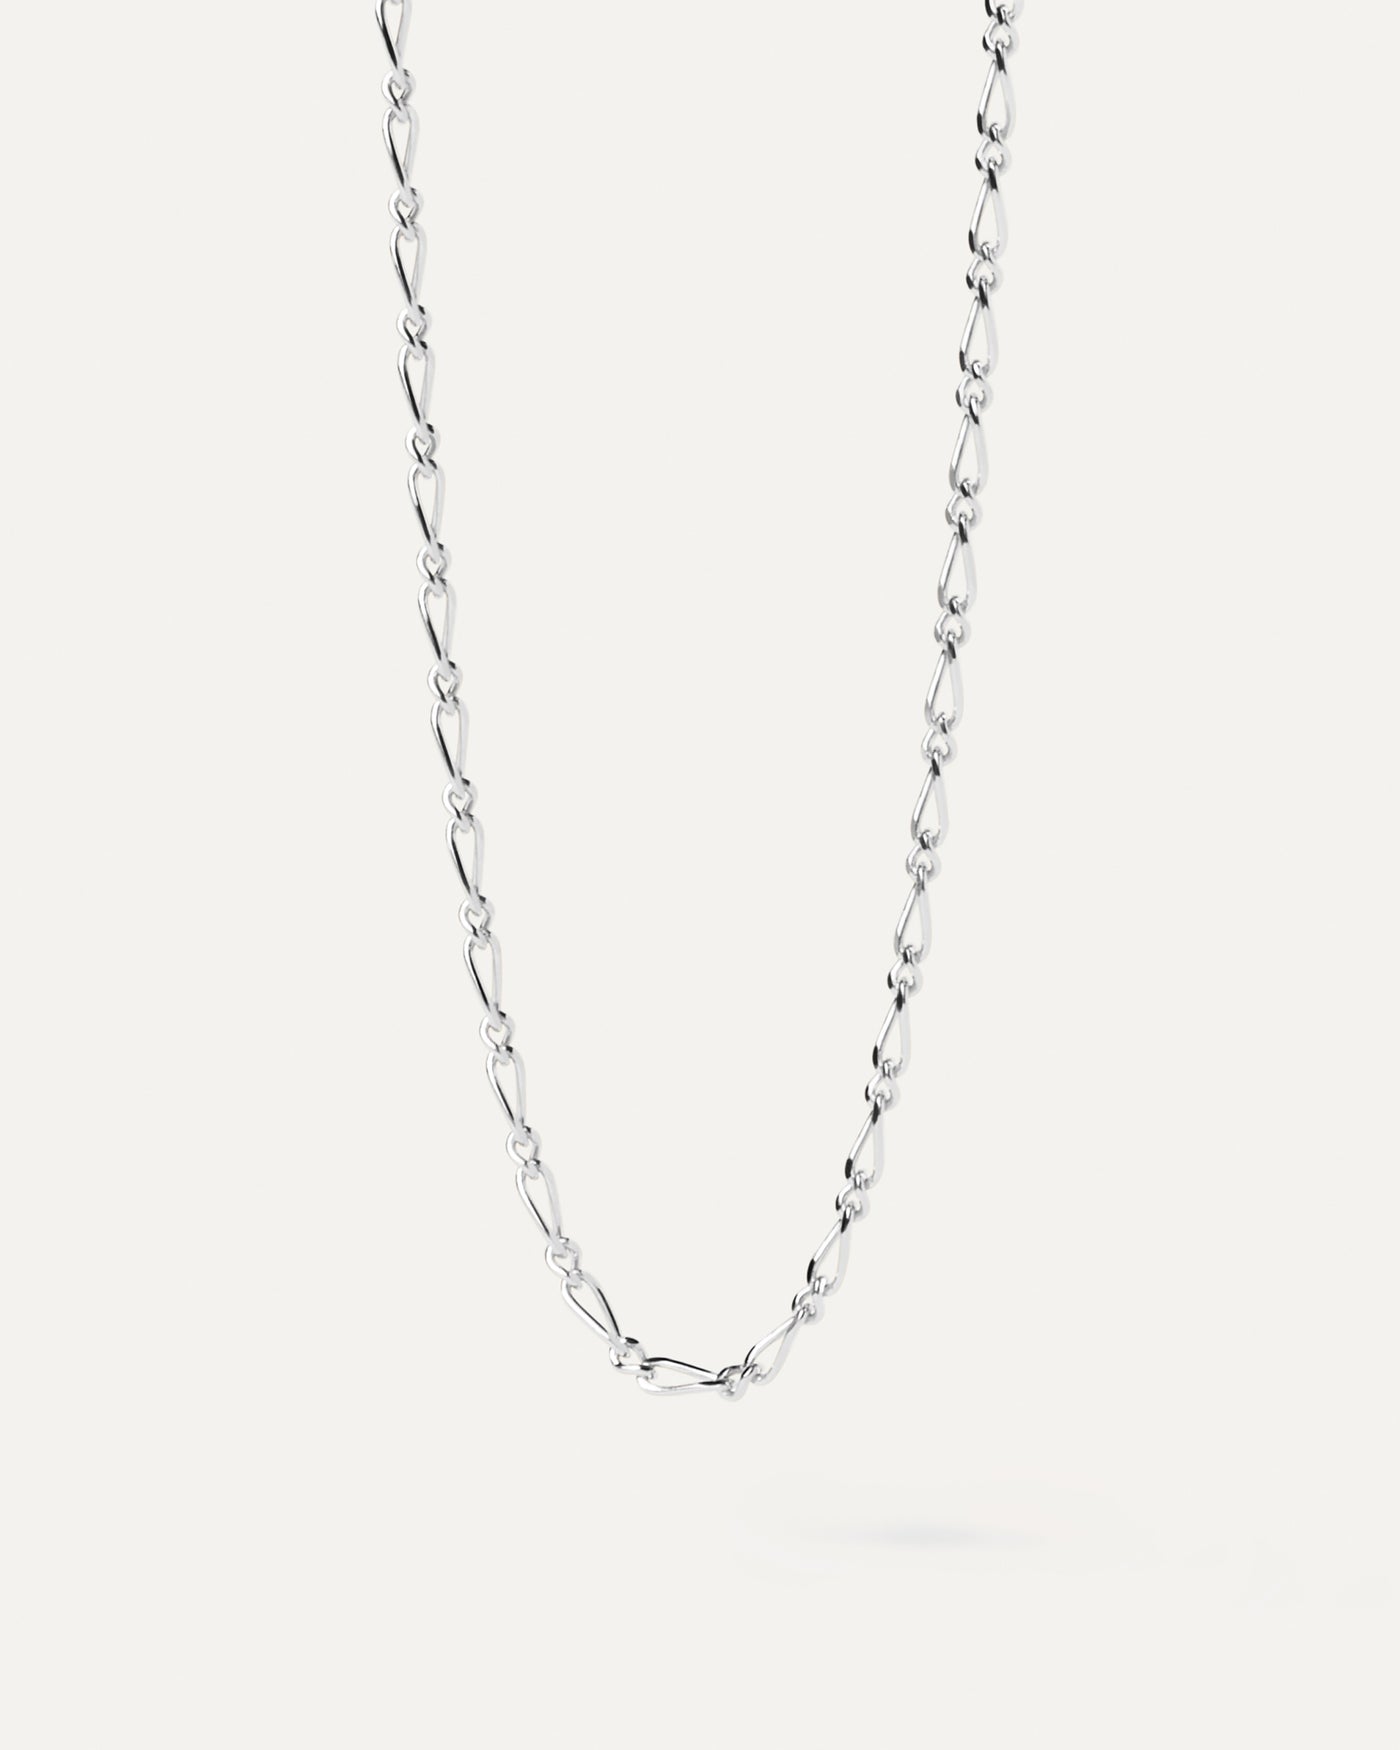 2023 Selection | Adele Silver Chain Necklace. Sleek silver chain necklace with intertwined asymmetric links. Get the latest arrival from PDPAOLA. Place your order safely and get this Best Seller. Free Shipping.